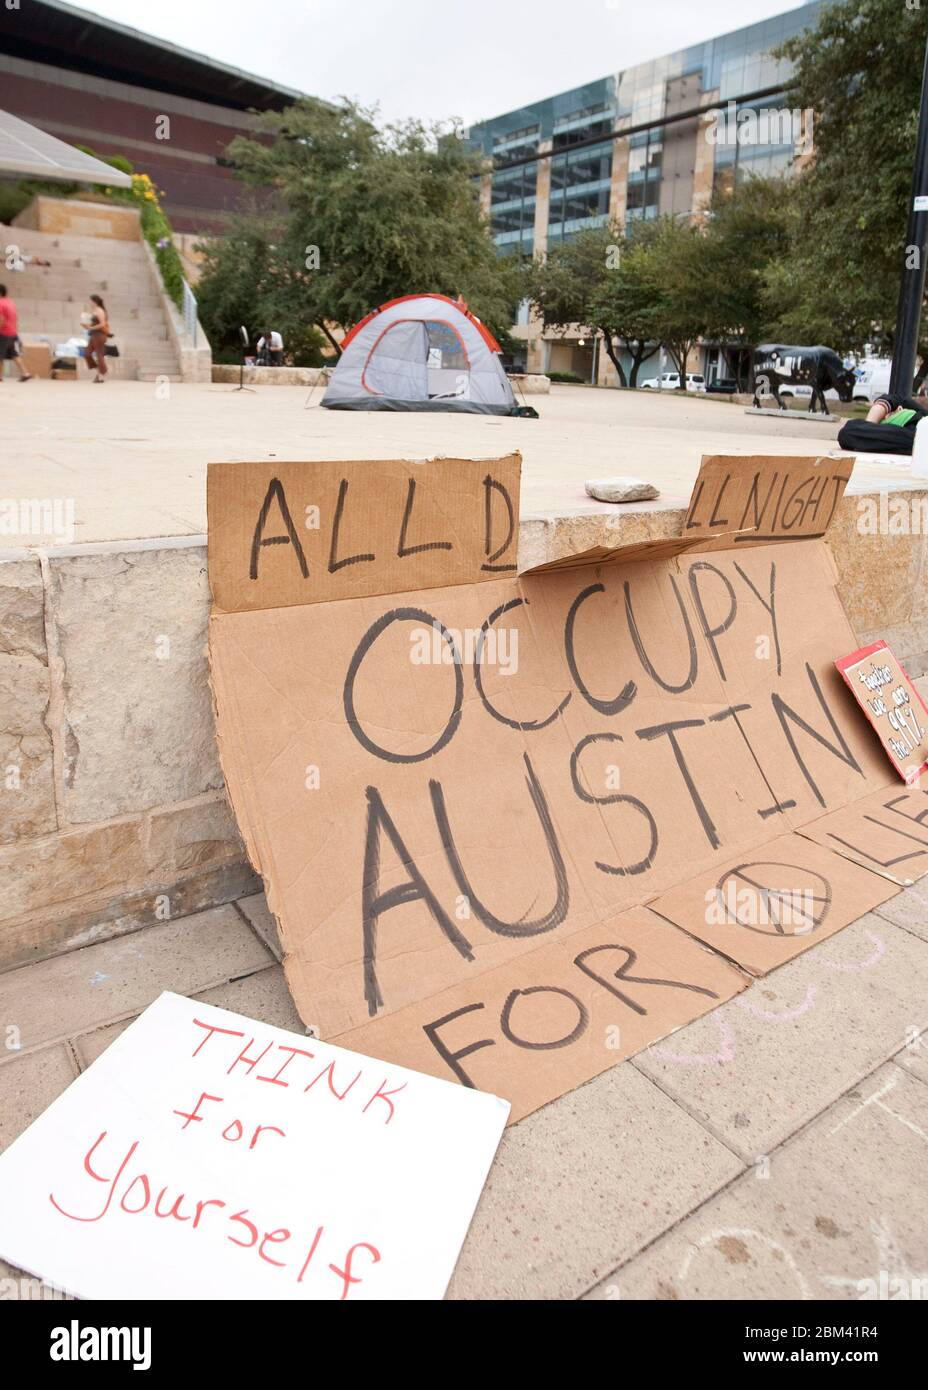 Austin, Texas USA, October 7, 2011: Tent on the Austin City Hall plaza in the early morning hours of an Occupy Austin demonstration at City Hall in downtown. Occupy Austin is an offshoot of Occupy Wall Street, an ongoing protest that denounces the role that large companies play in the current financial crisis. Protesters have been camping out on the plaza for several days. ©Marjorie Kamys Cotera/Daemmrich Photography Stock Photo